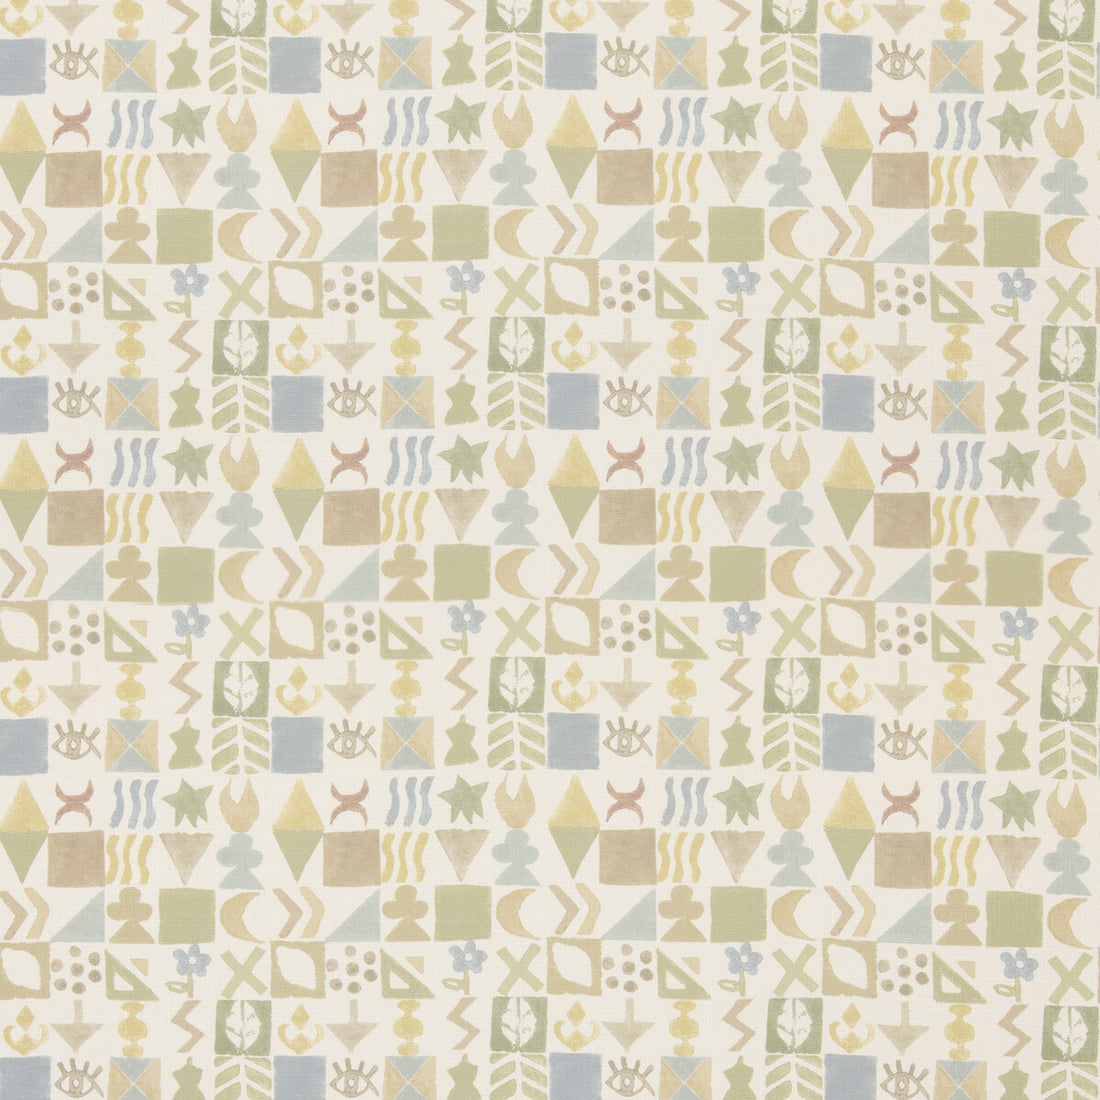 Potato Print fabric in sage color - pattern BP11049.4.0 - by G P &amp; J Baker in the X Kit Kemp Prints And Embroideries collection